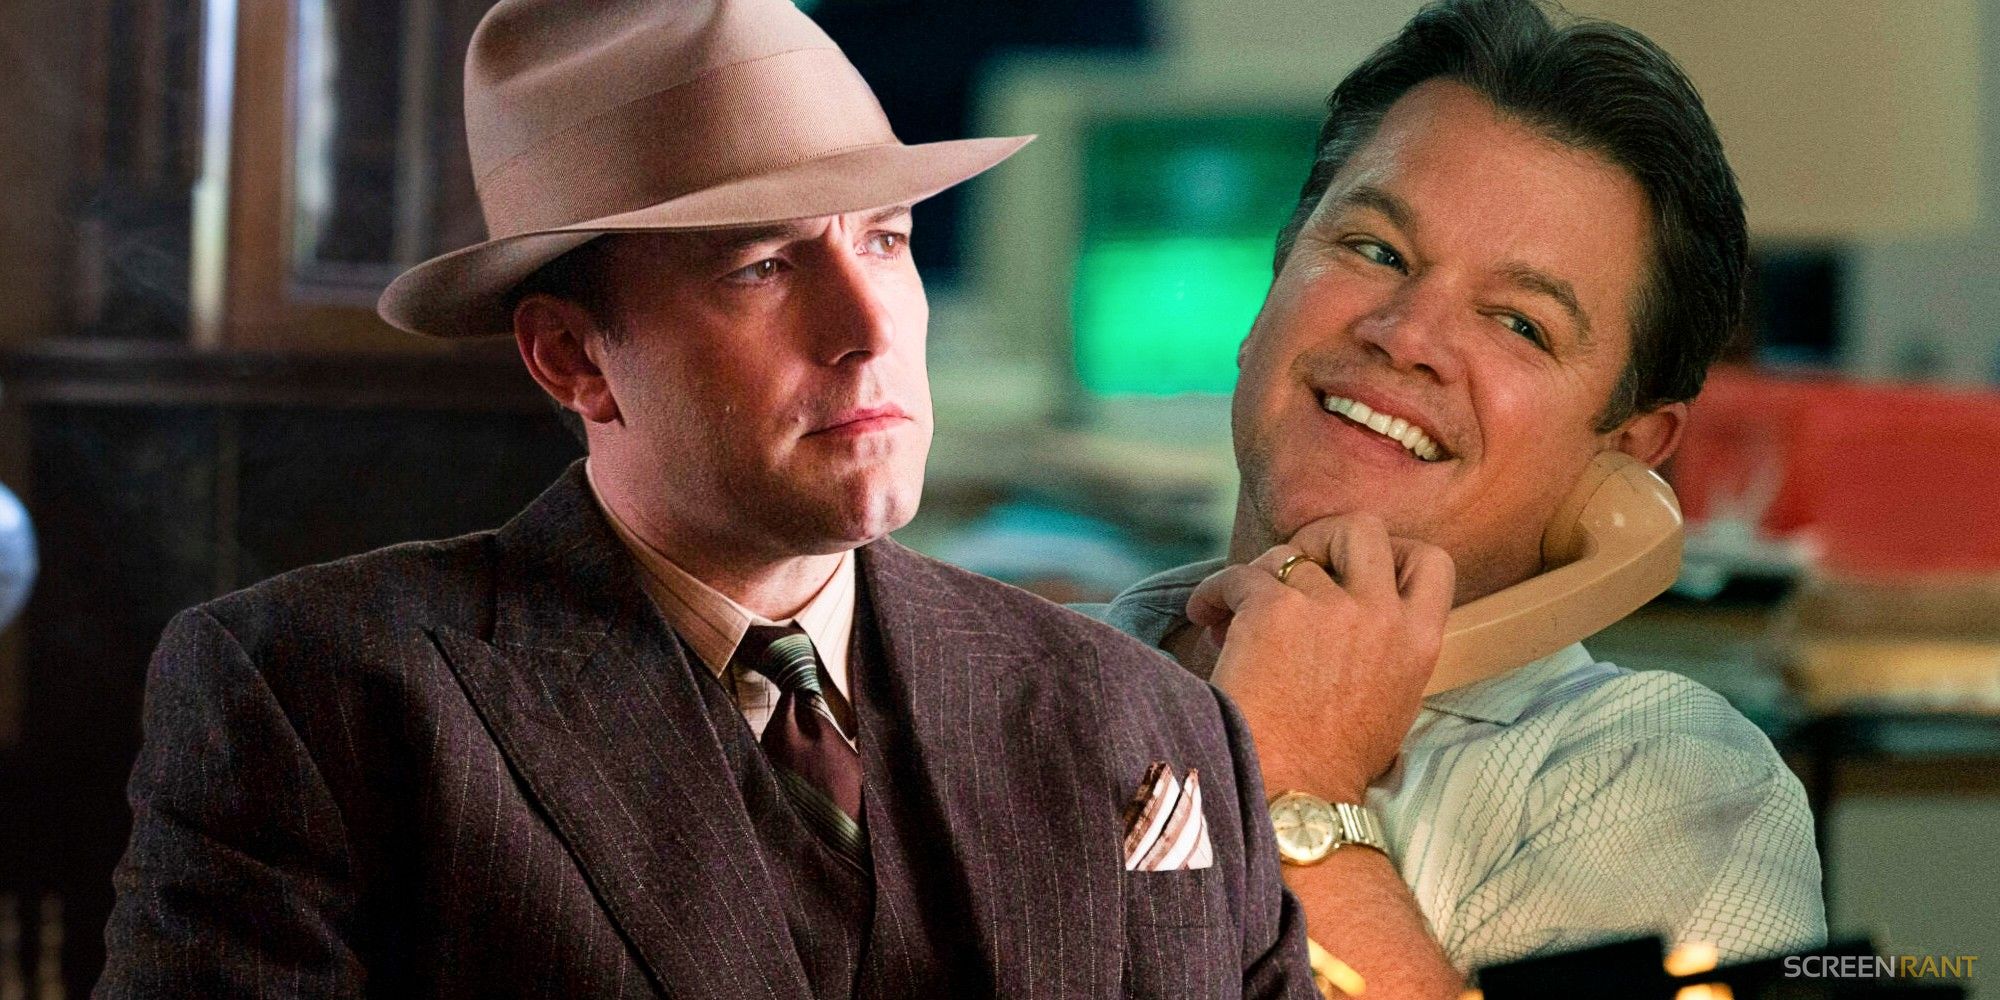 Ben Affleck in Live By Night and Matt Damon in Air